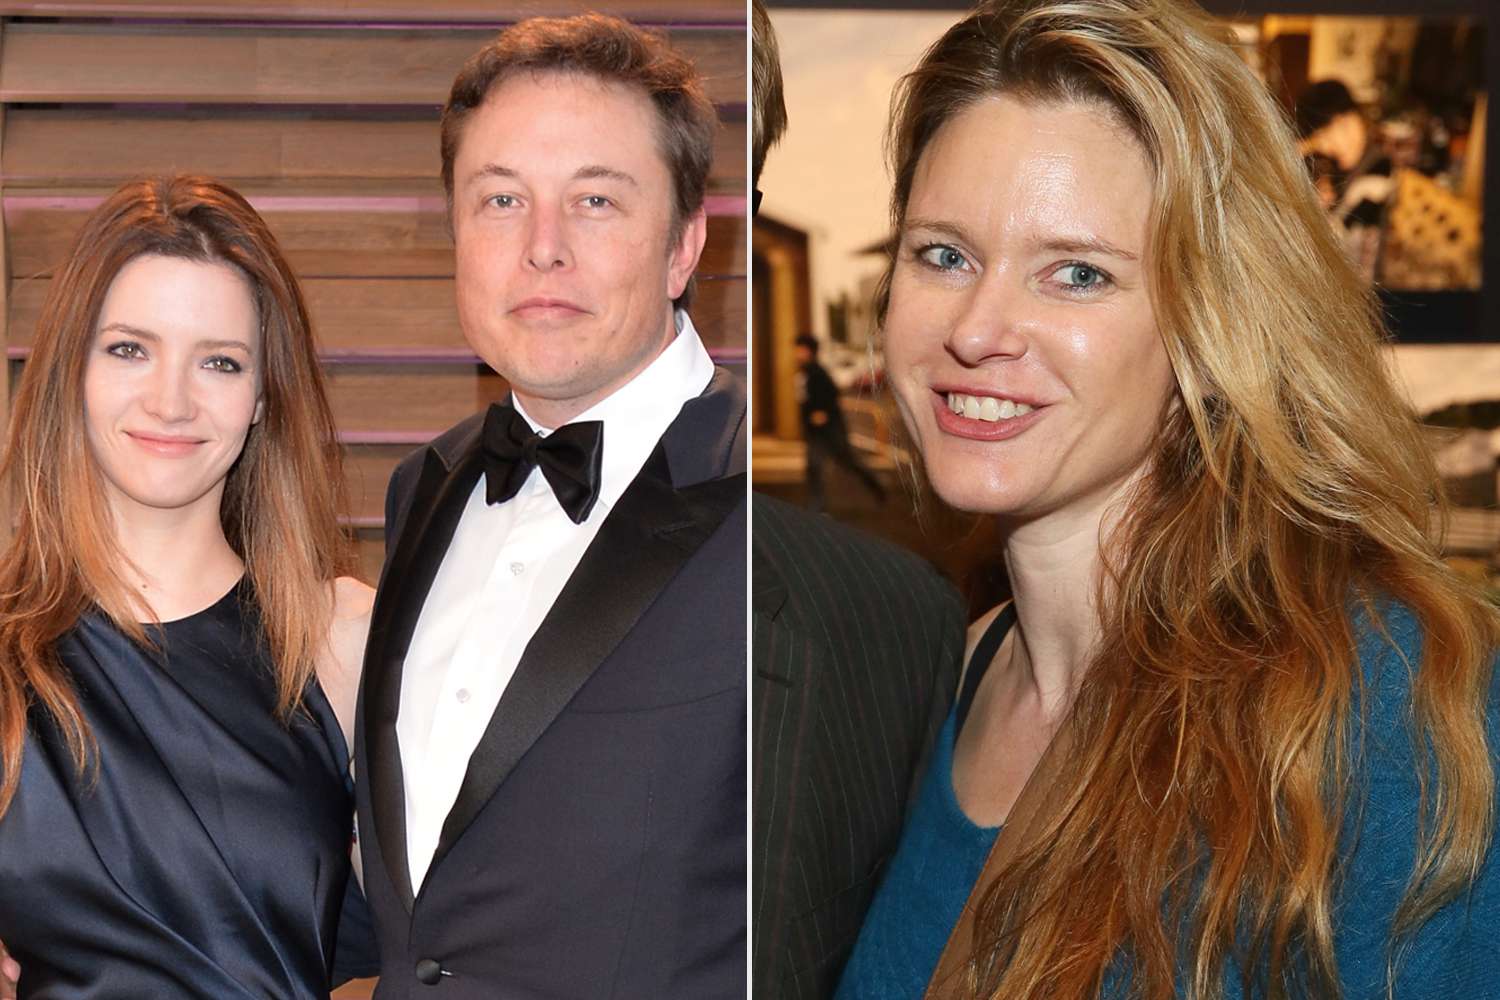 Who Is Elon Musk's Ex-Wife? All About Justine Musk | PEOPLE.com's Ex-Wife? All About Justine Musk | PEOPLE.com